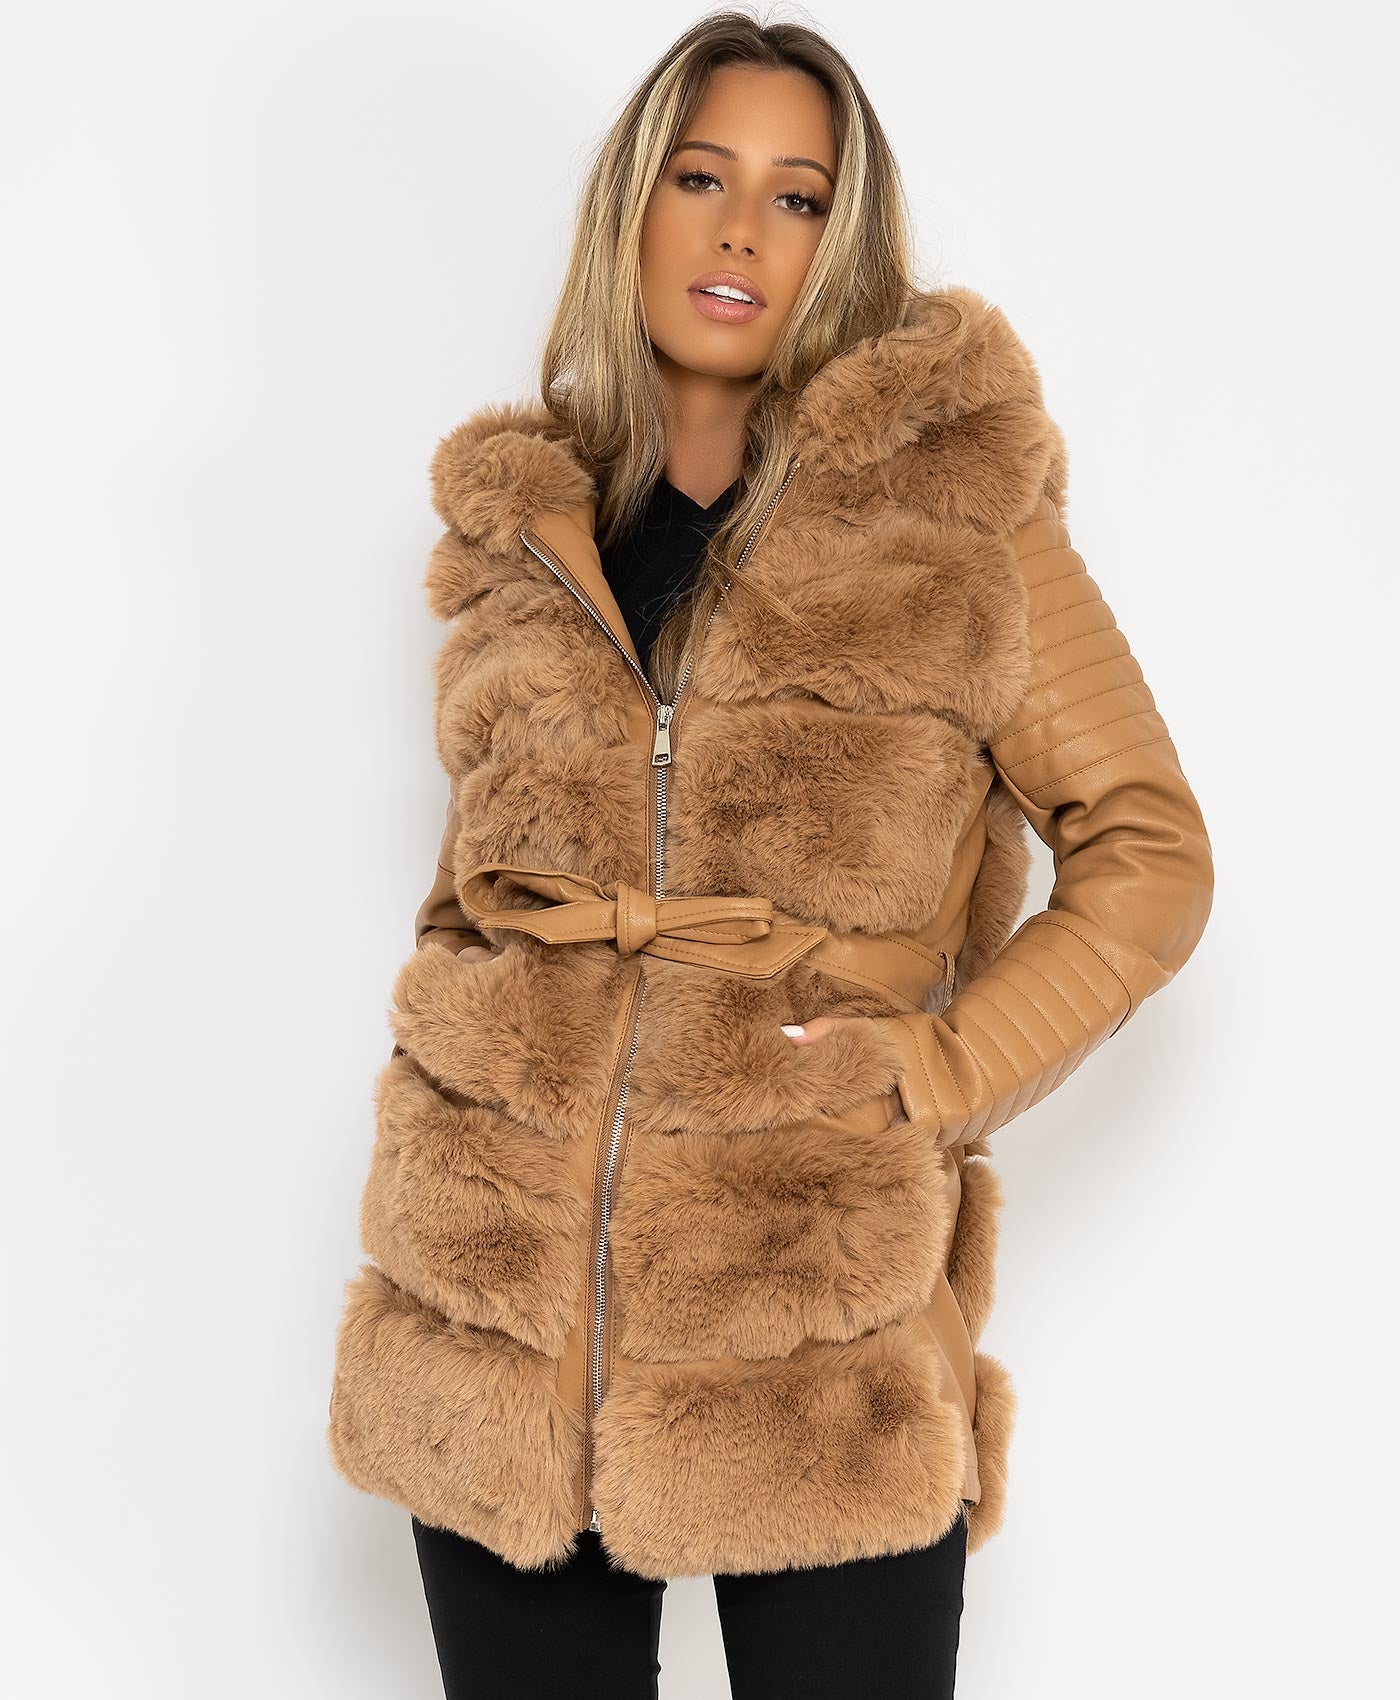 Camel-Pu-Pvc-Tiered-Faux-Fur-Hooded-3-4-Coat-Jacket-3